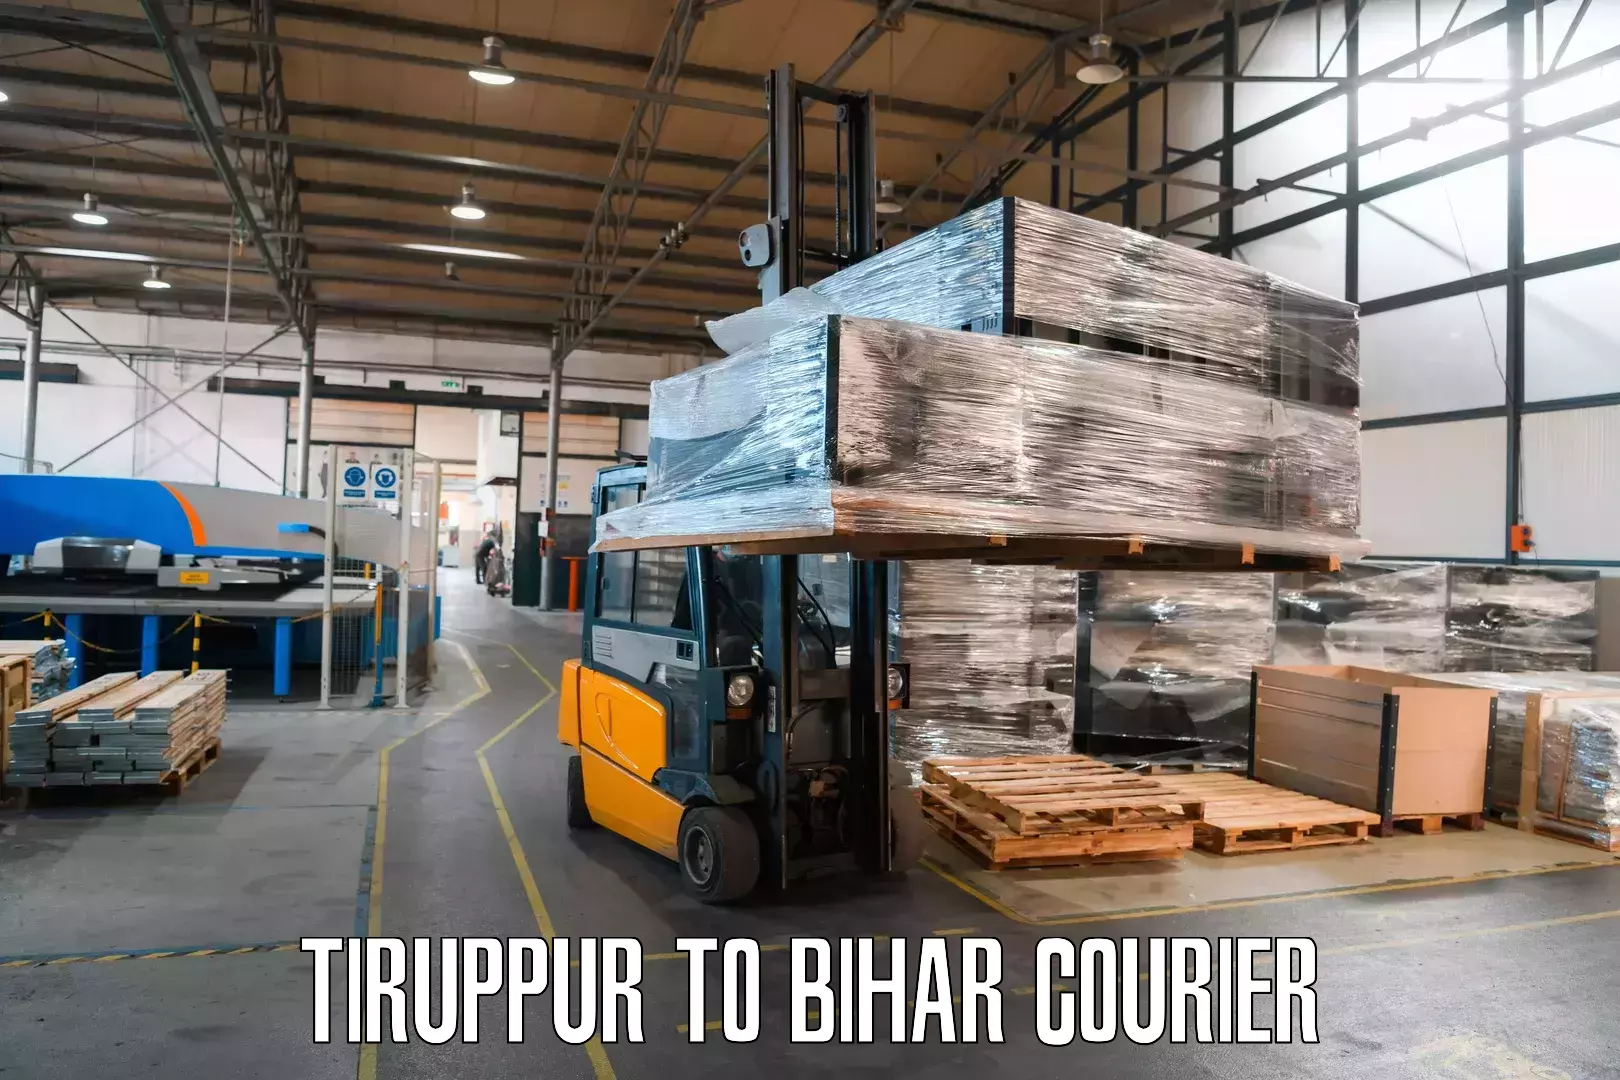 Courier service comparison in Tiruppur to Katihar